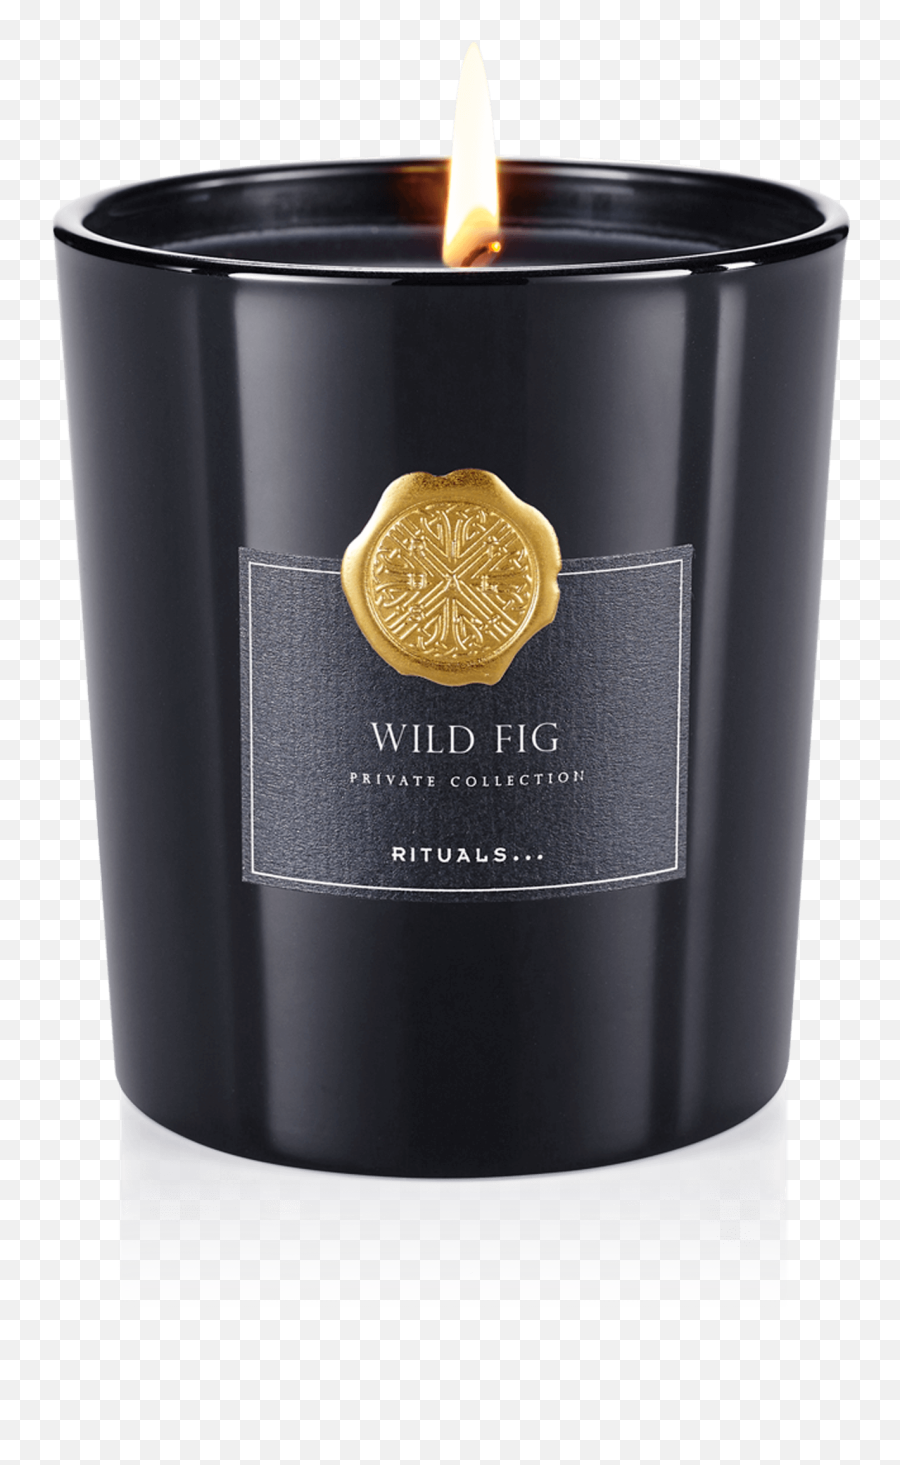 Wild Fig Scented Candle - Rituals Wild Fig Png,Transparent Candle